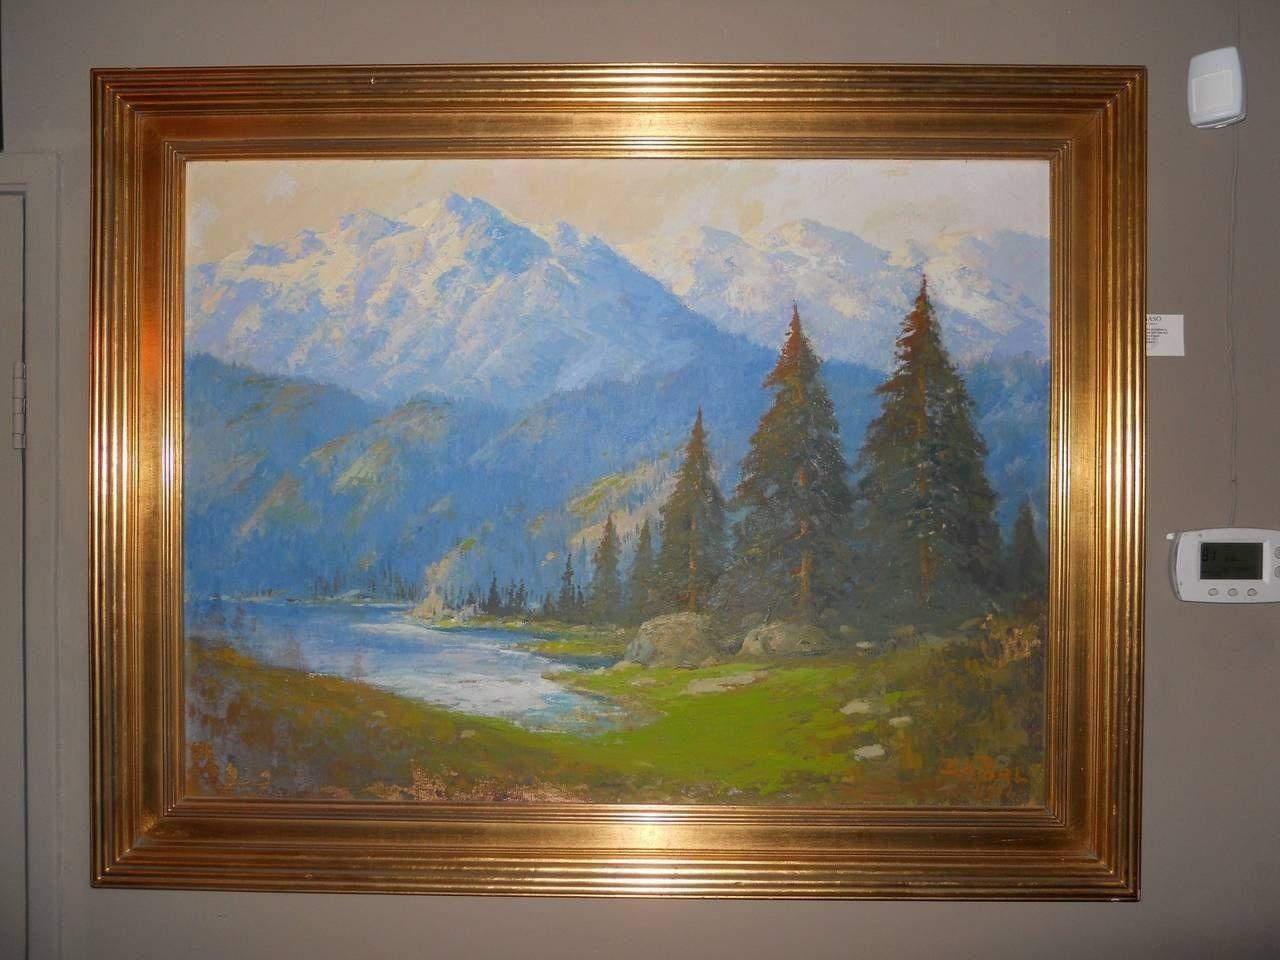 Enchanting Ernest Henry Pohl painting: 